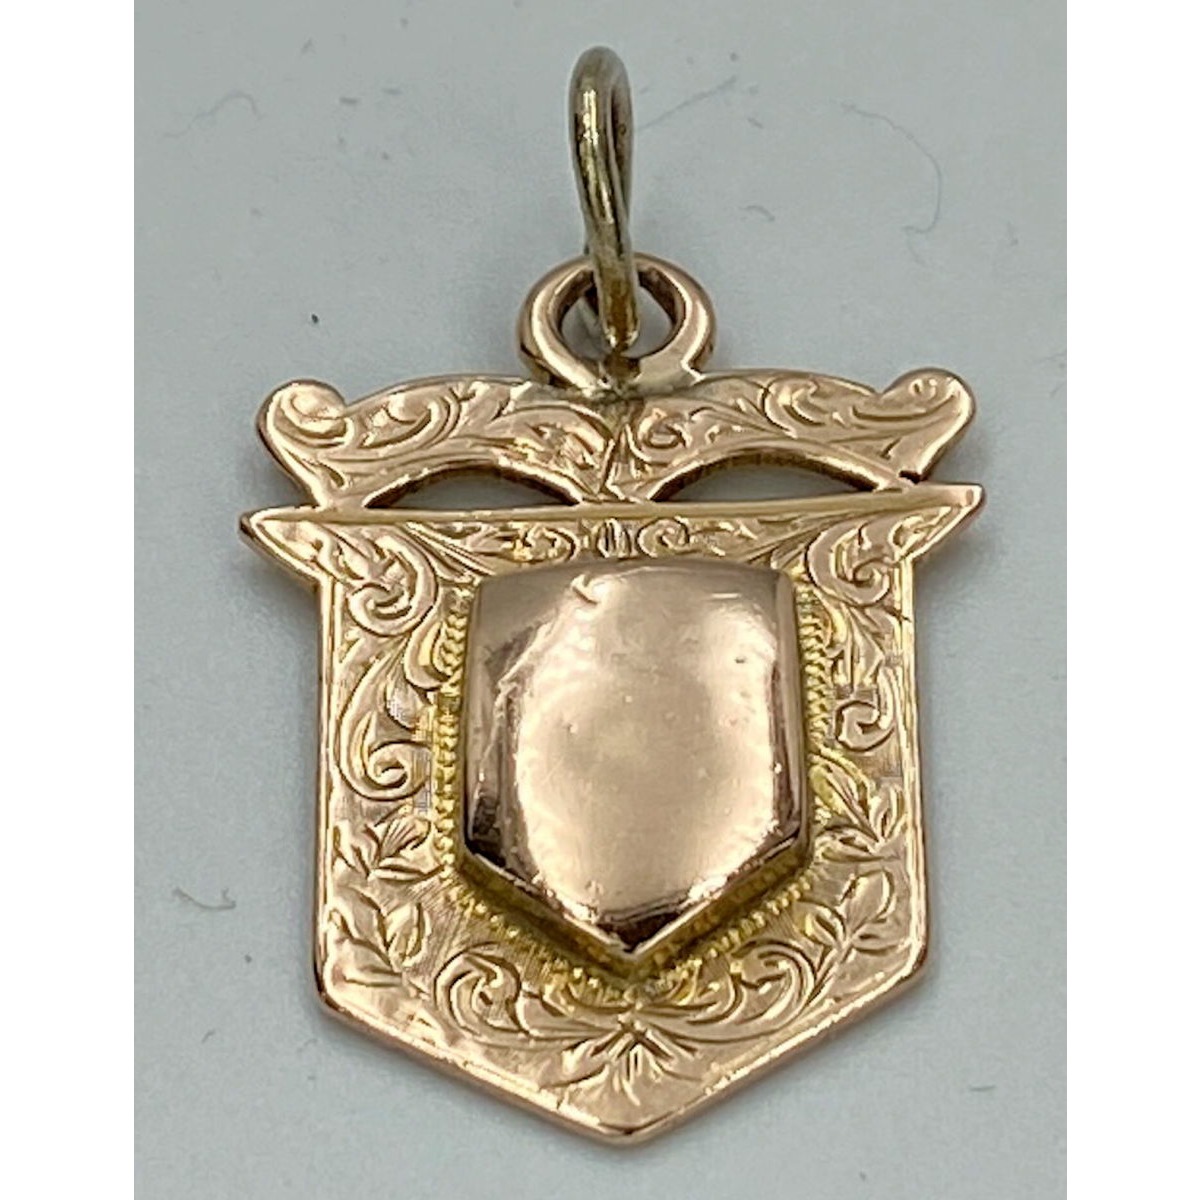 Shield-shaped Antique English Gold Medal Fob - Perfect for Grouping